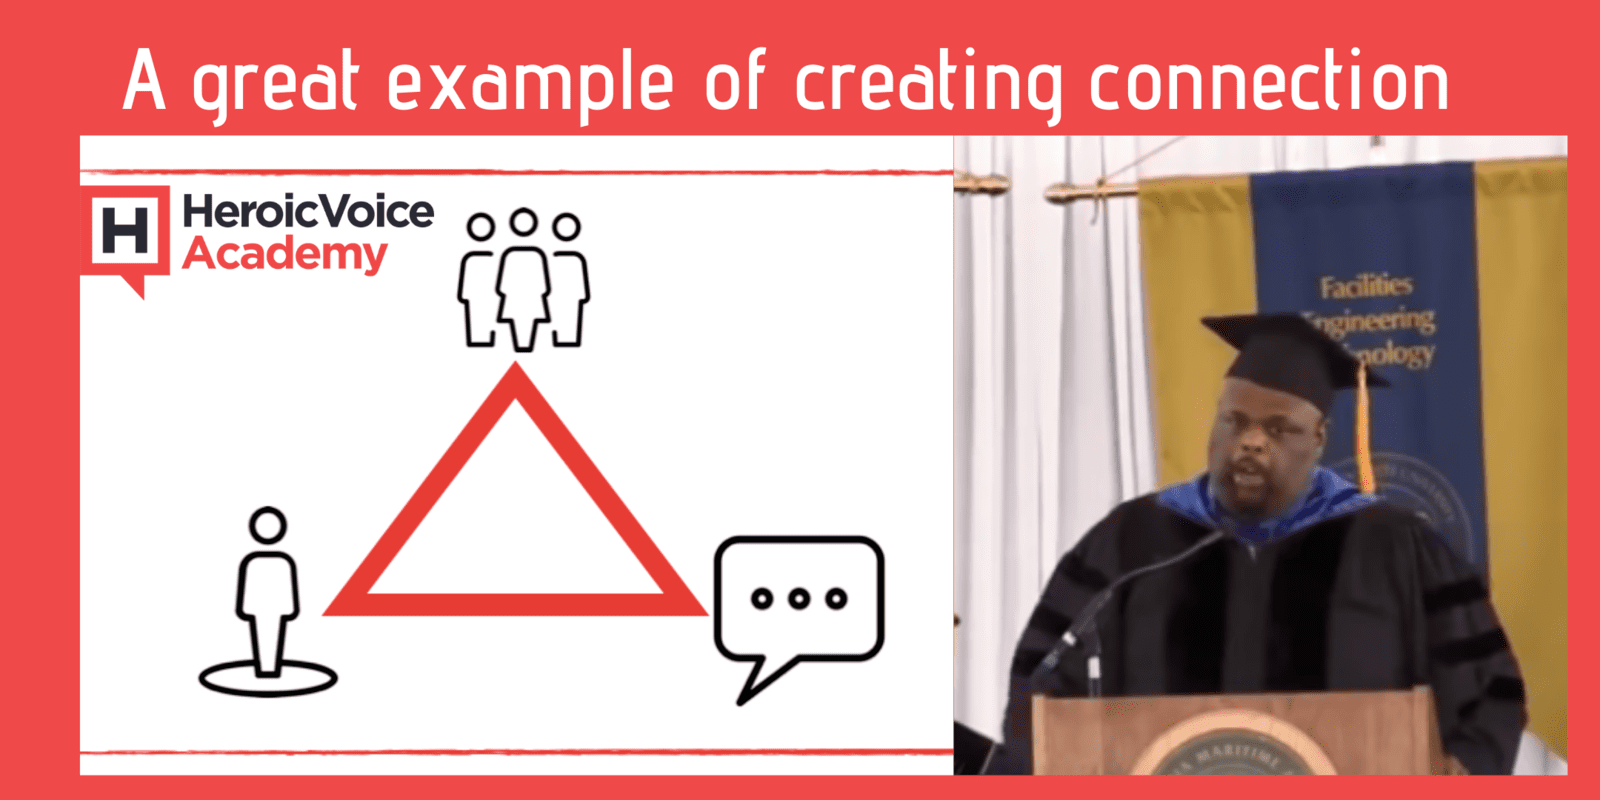 Creating Connection